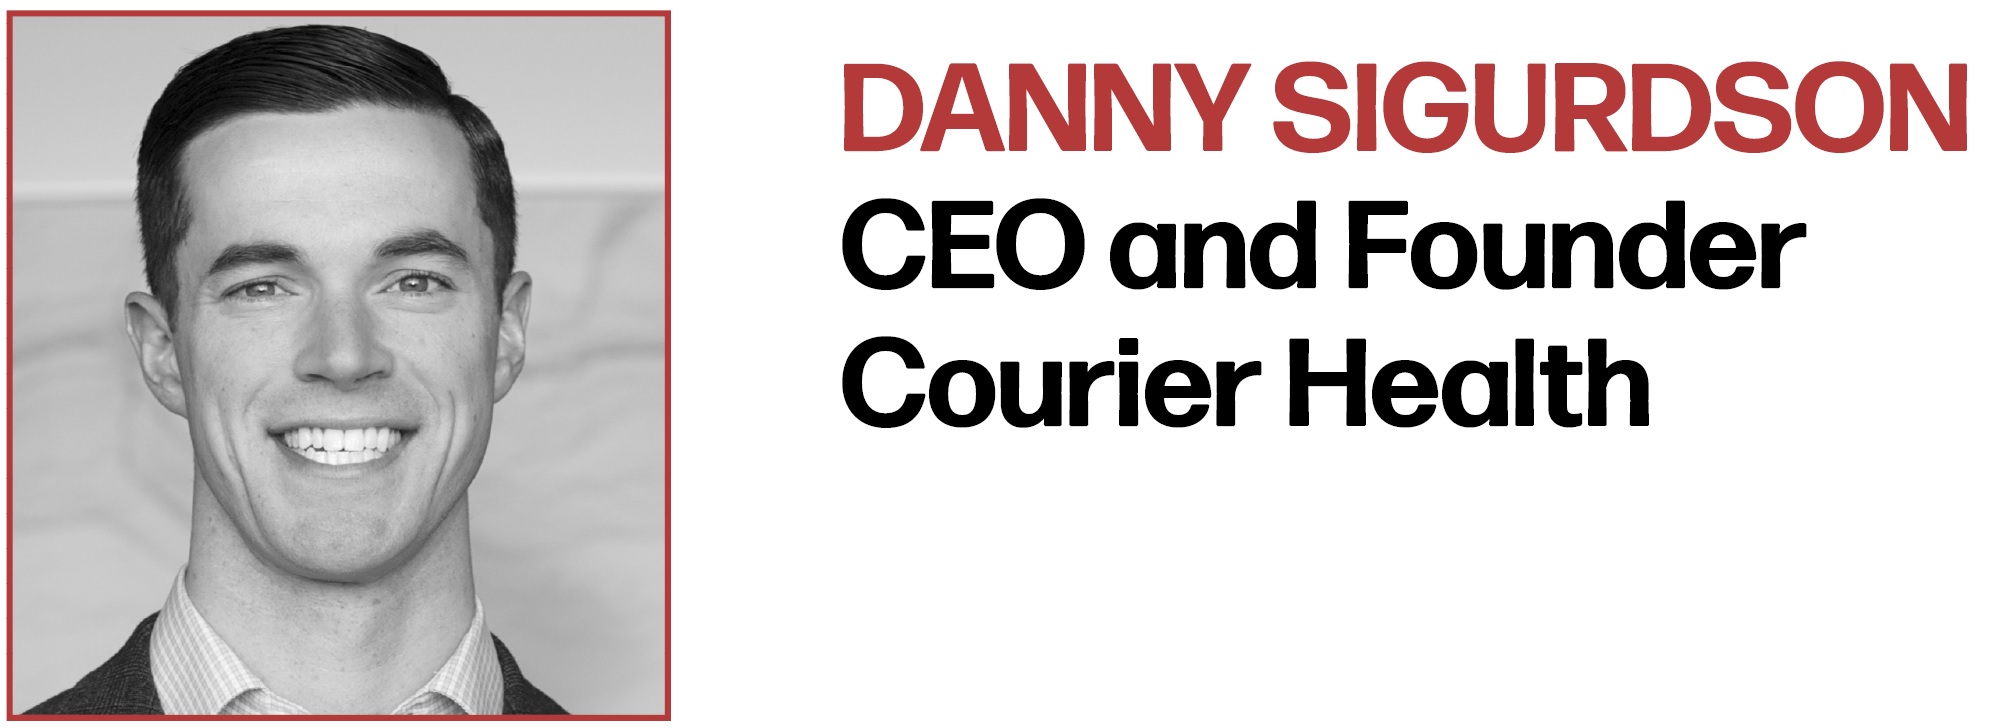 Danny Sigurdson CEO and Founder Courier Health